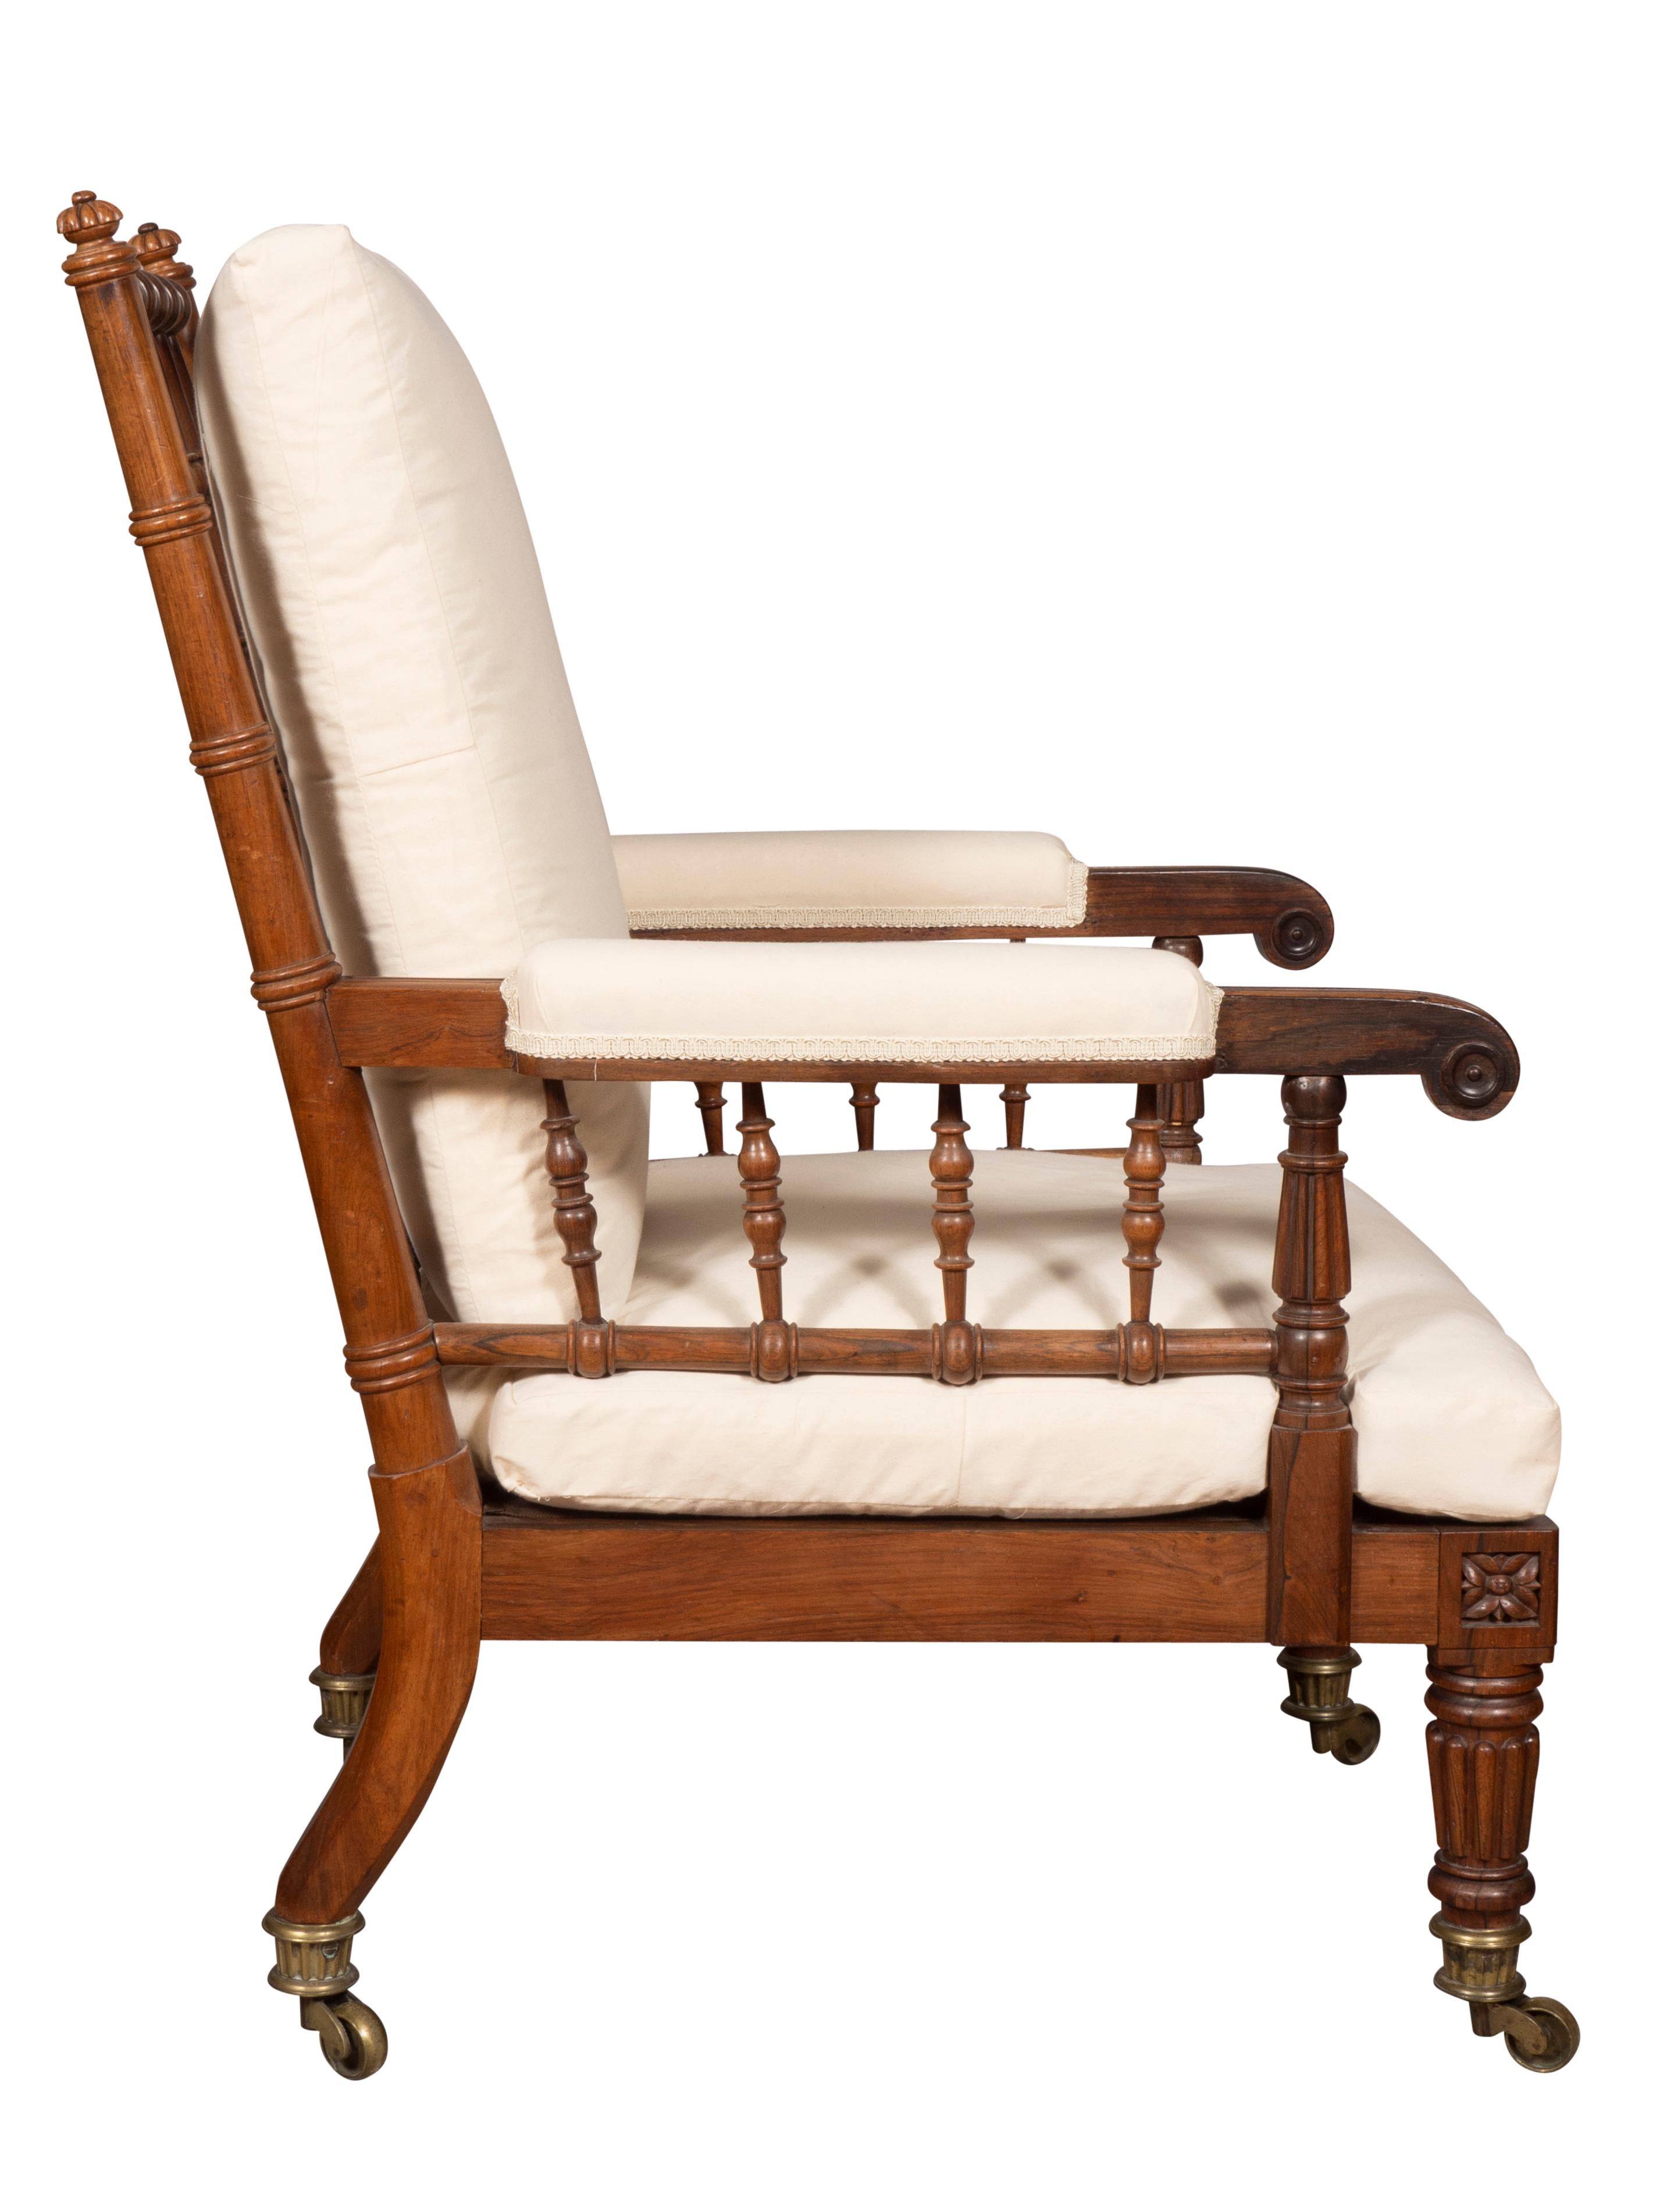 English Regency Rosewood Armchair By Gillows For Sale